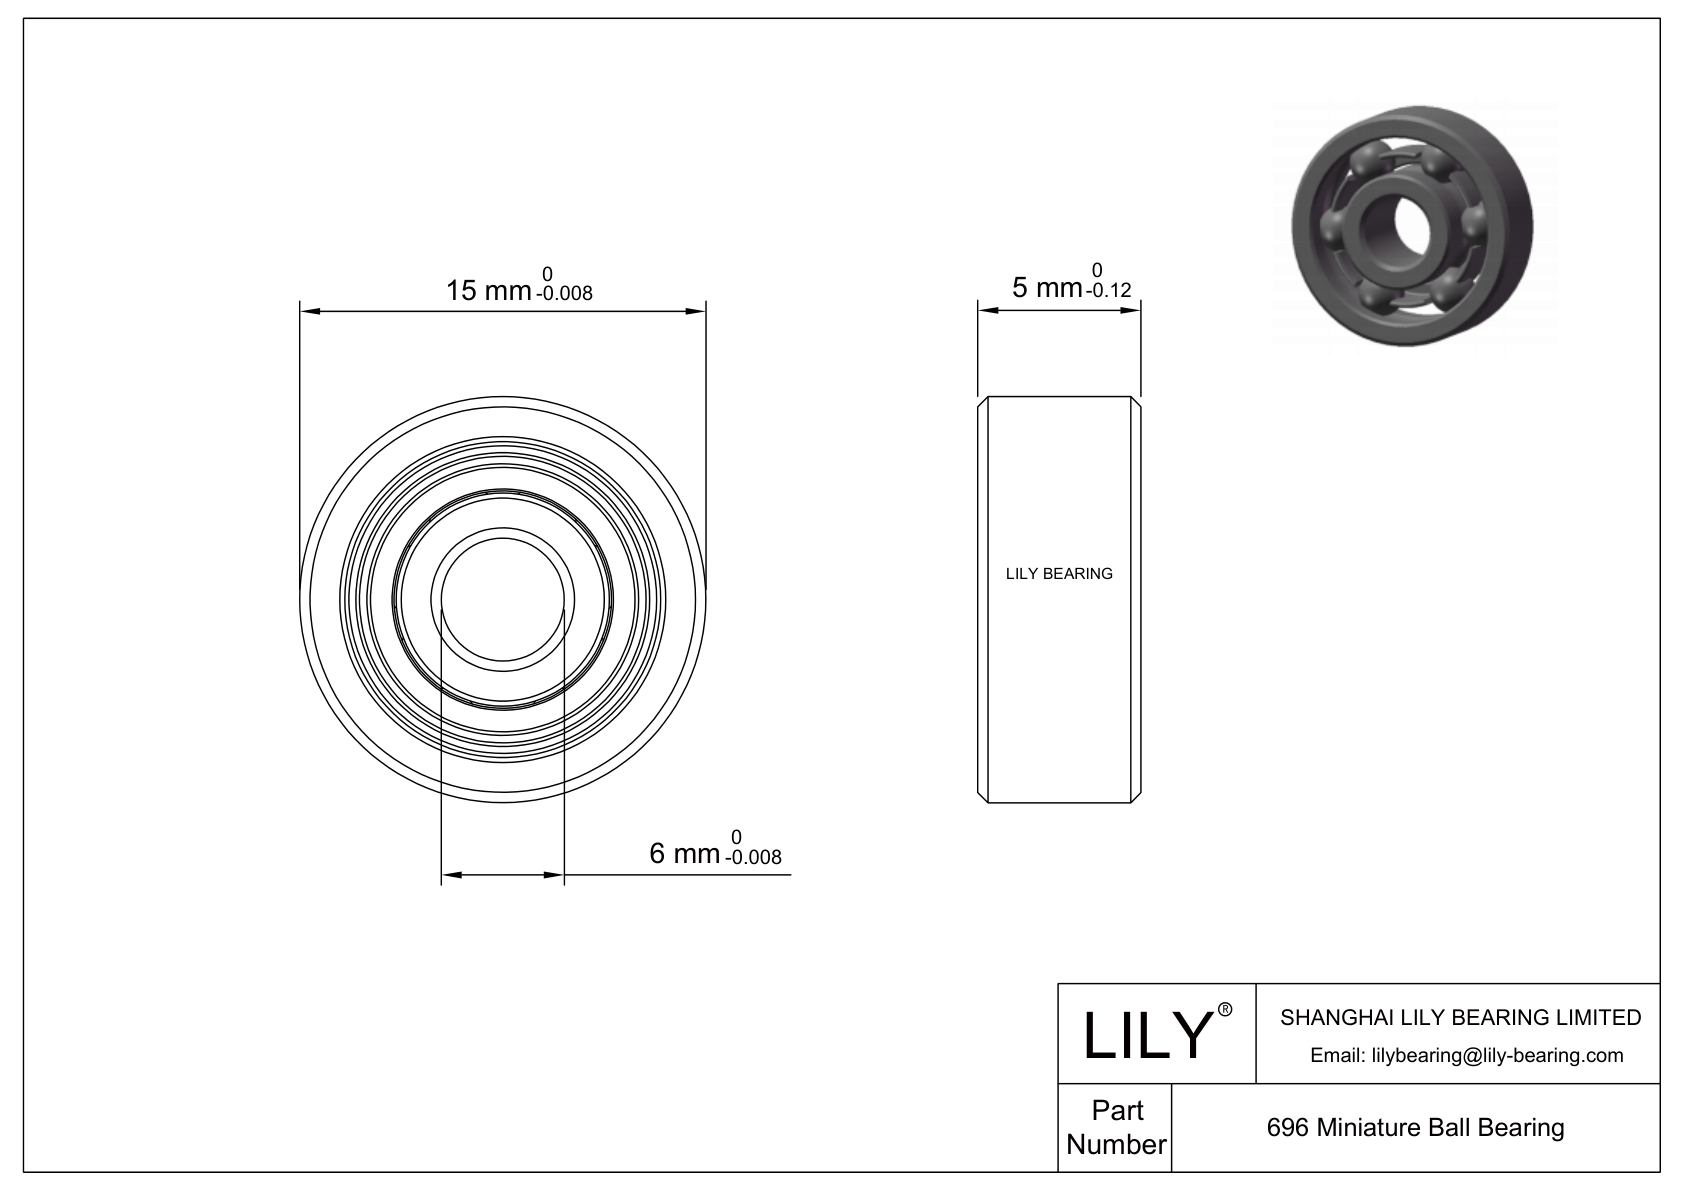 LILY-BS69620-8 POM Coated Bearing cad drawing